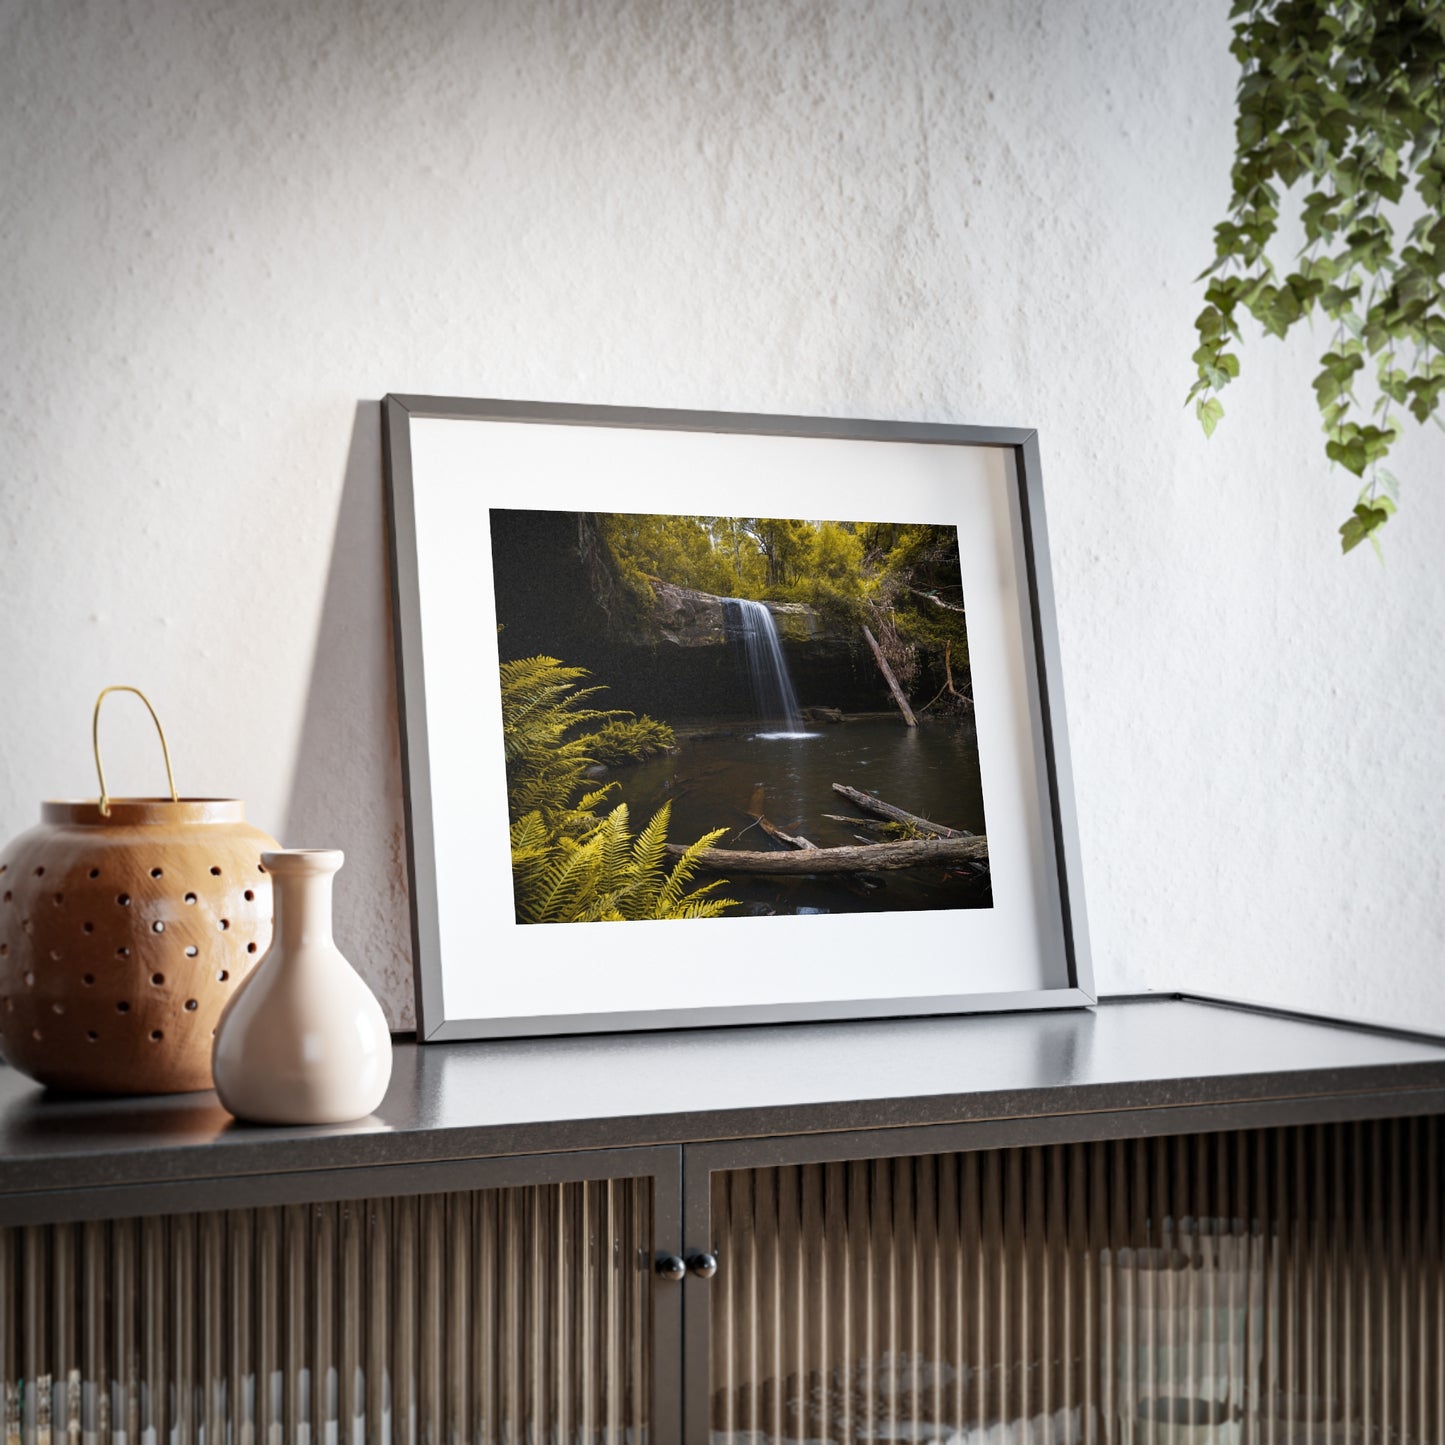 The beautiful Lower Kalimna Falls printed on a matte framed poster